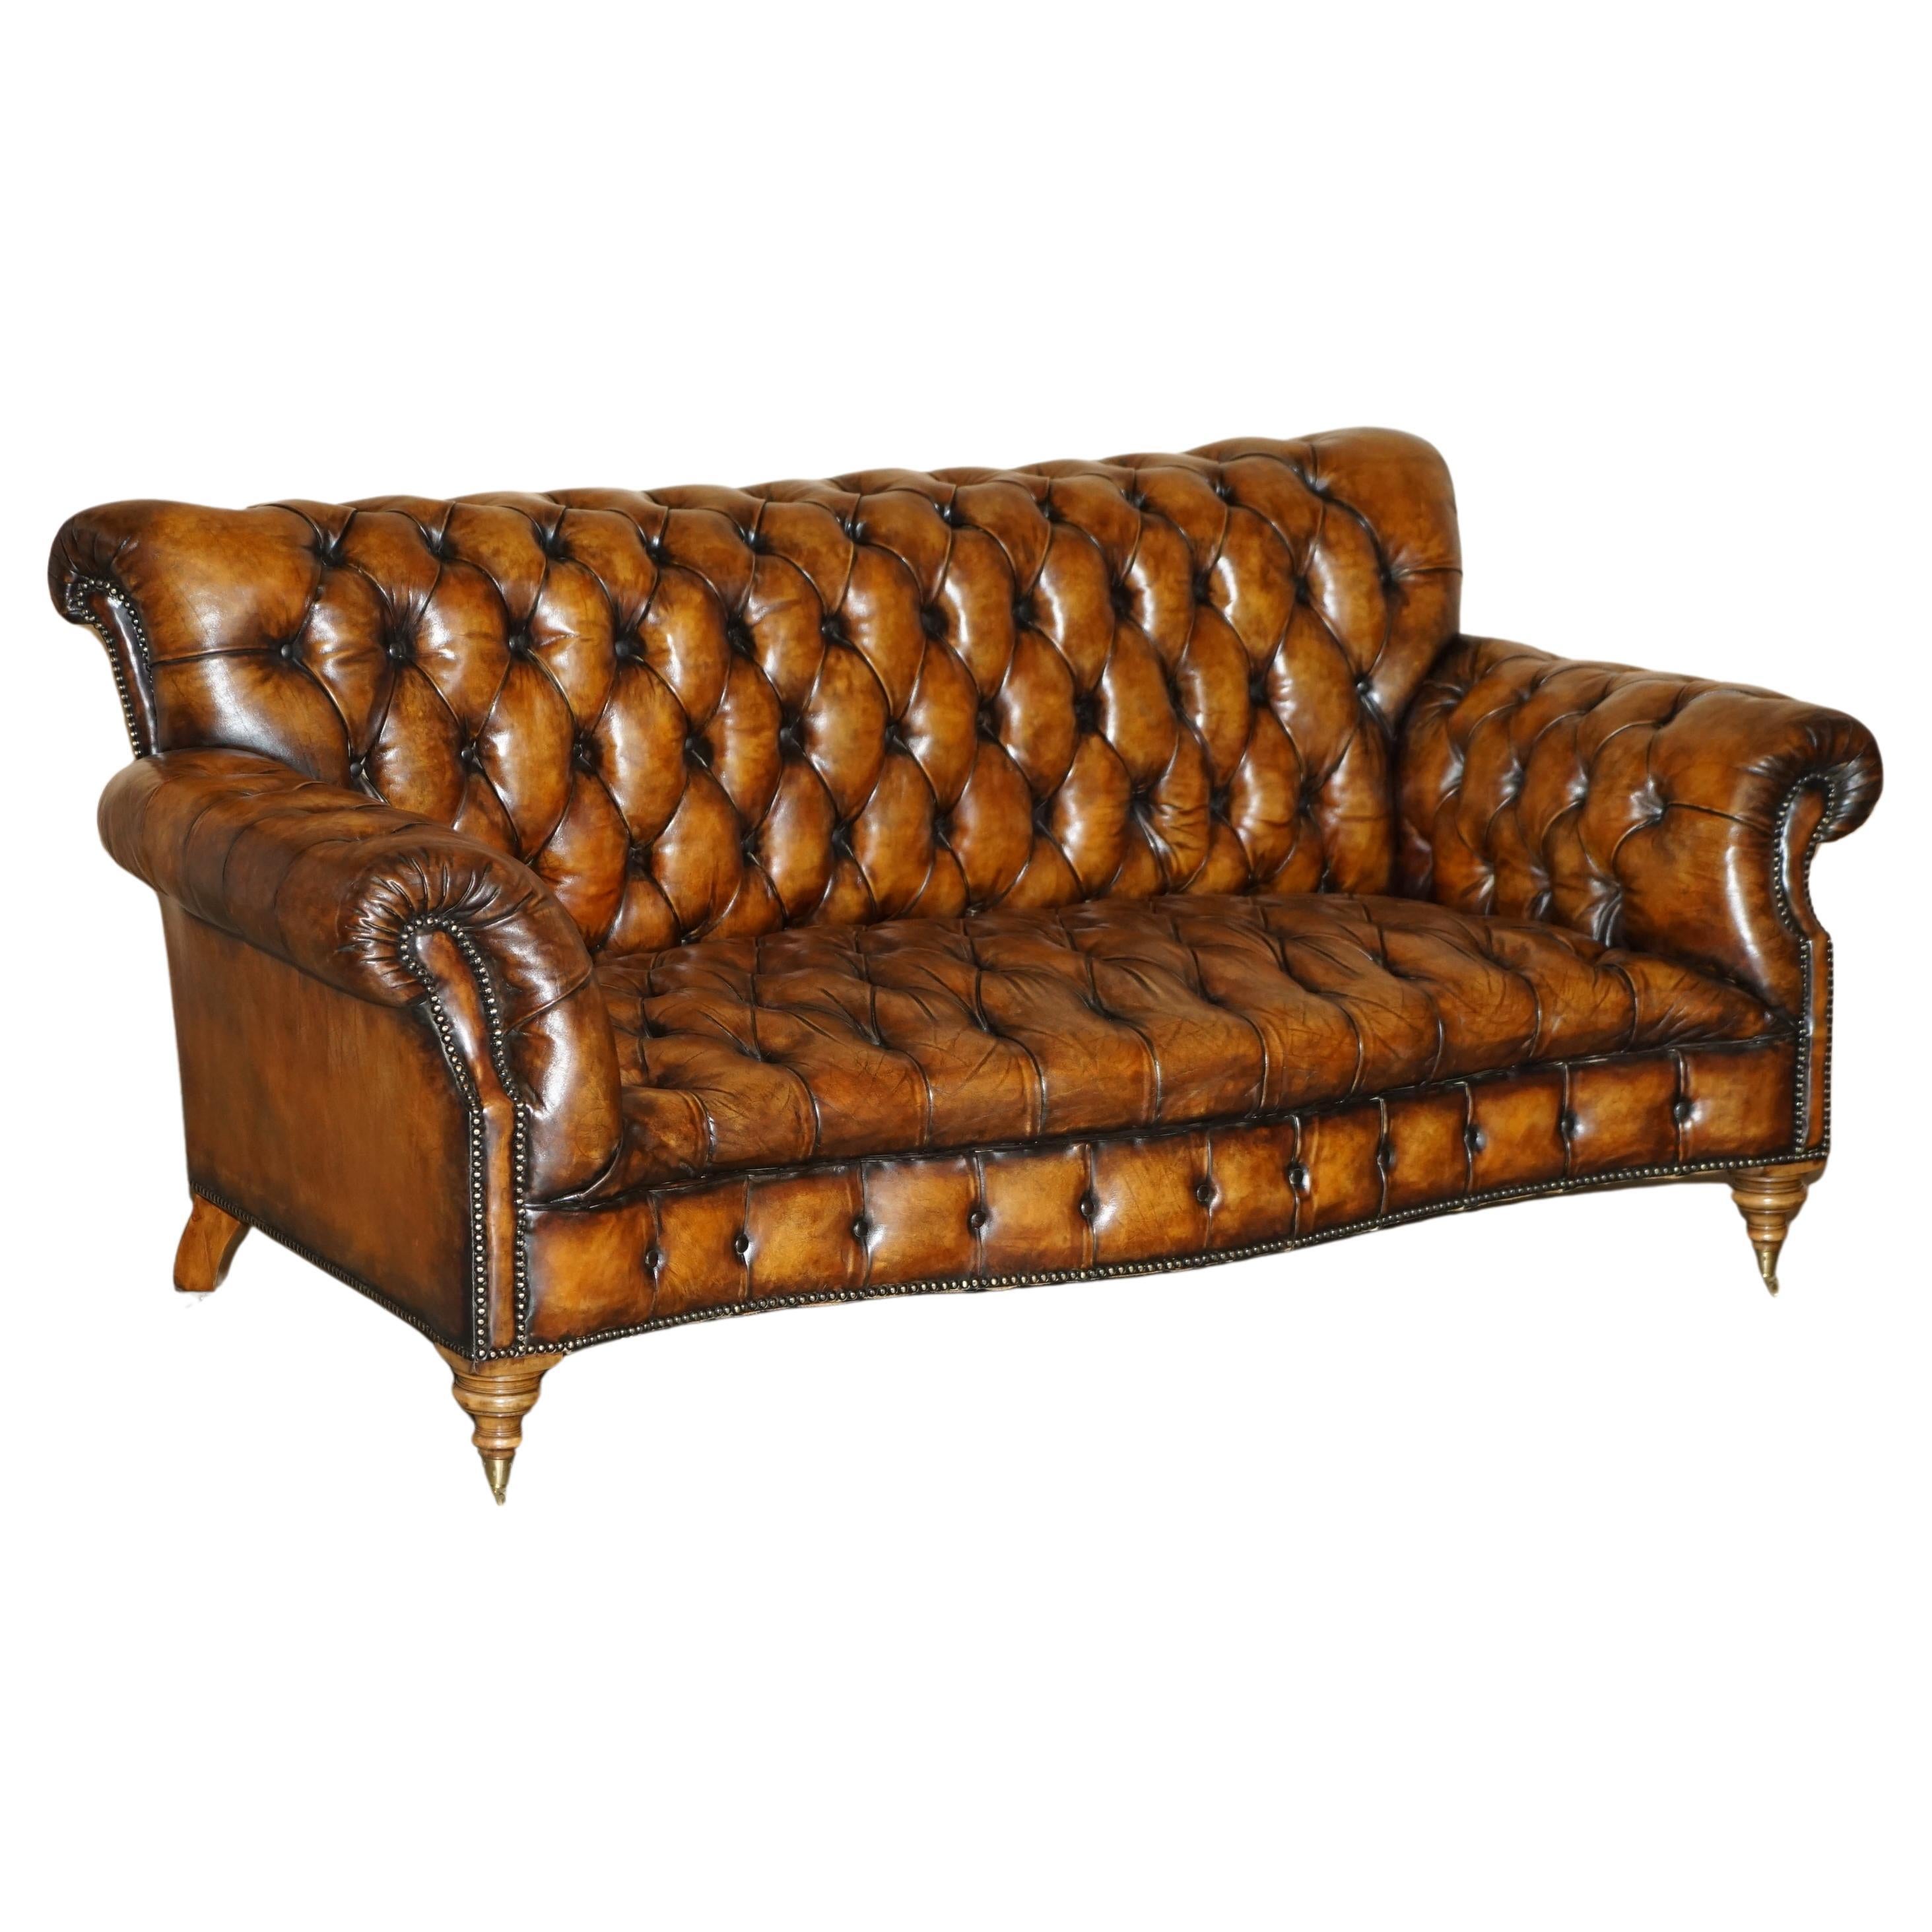 VICTORIAN SERPENTINE FRONTED HAND DYED RESTORED BROWN LEATHER CHESTERFiELD SOFA For Sale